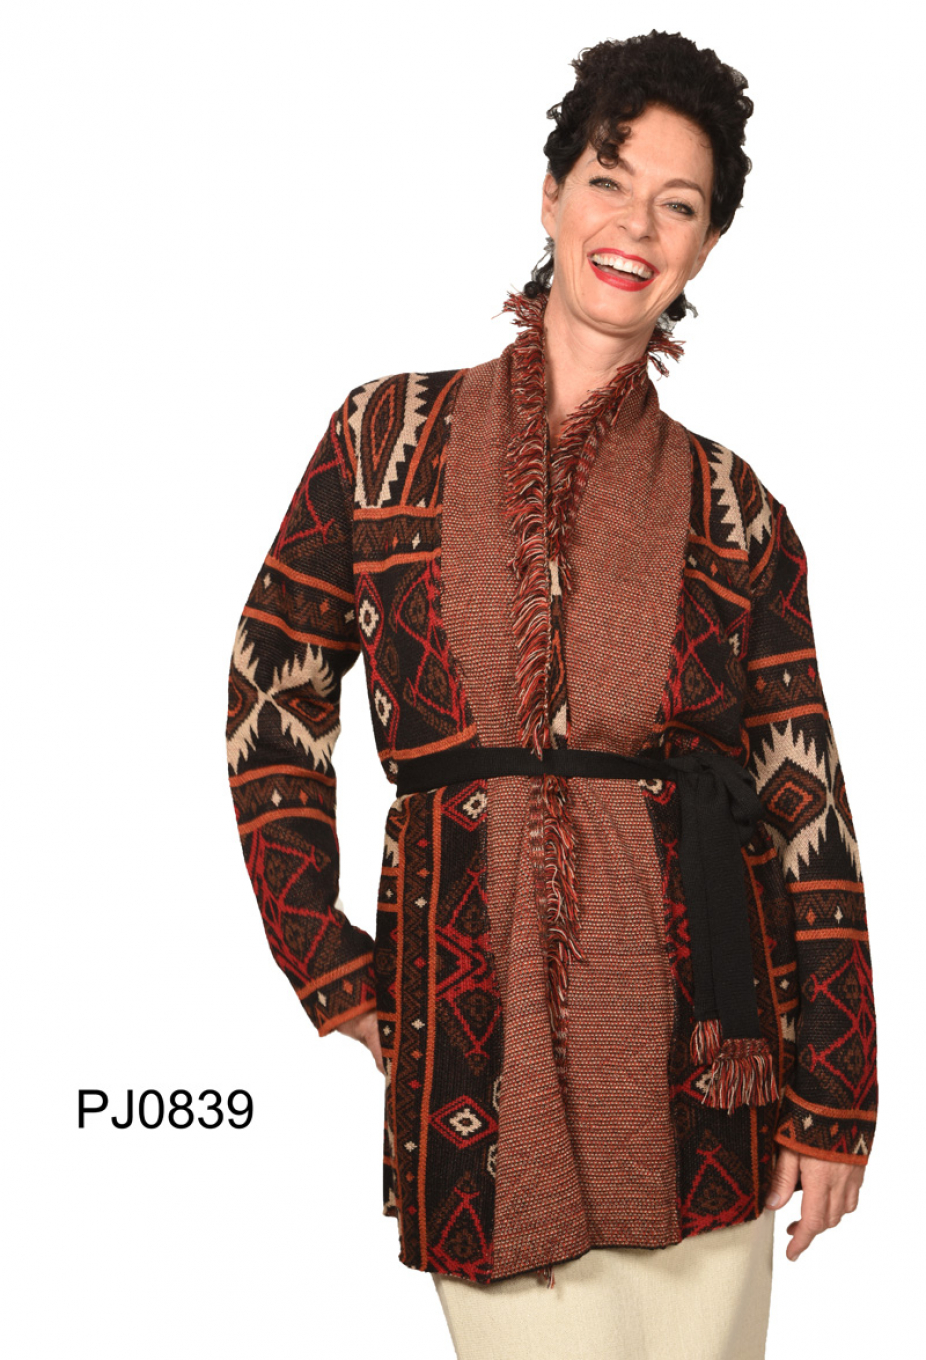 Womens Baby Alpaca Coat "Arequipa" with fringe and belt-detail